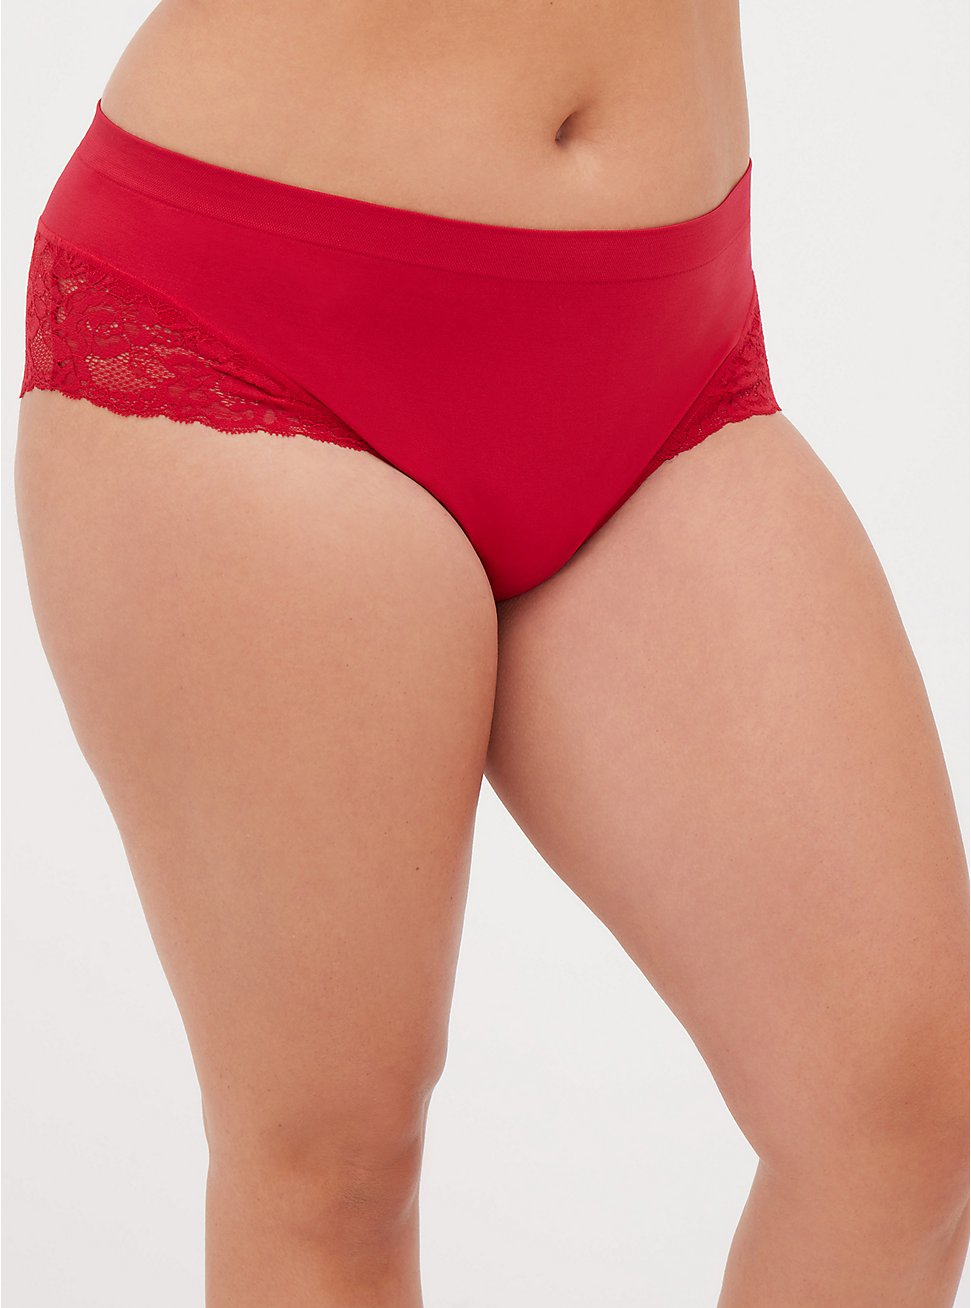 Plus Size Seamless Flirt Cheeky Panty - Nylon Red, JESTER RED, hi-res